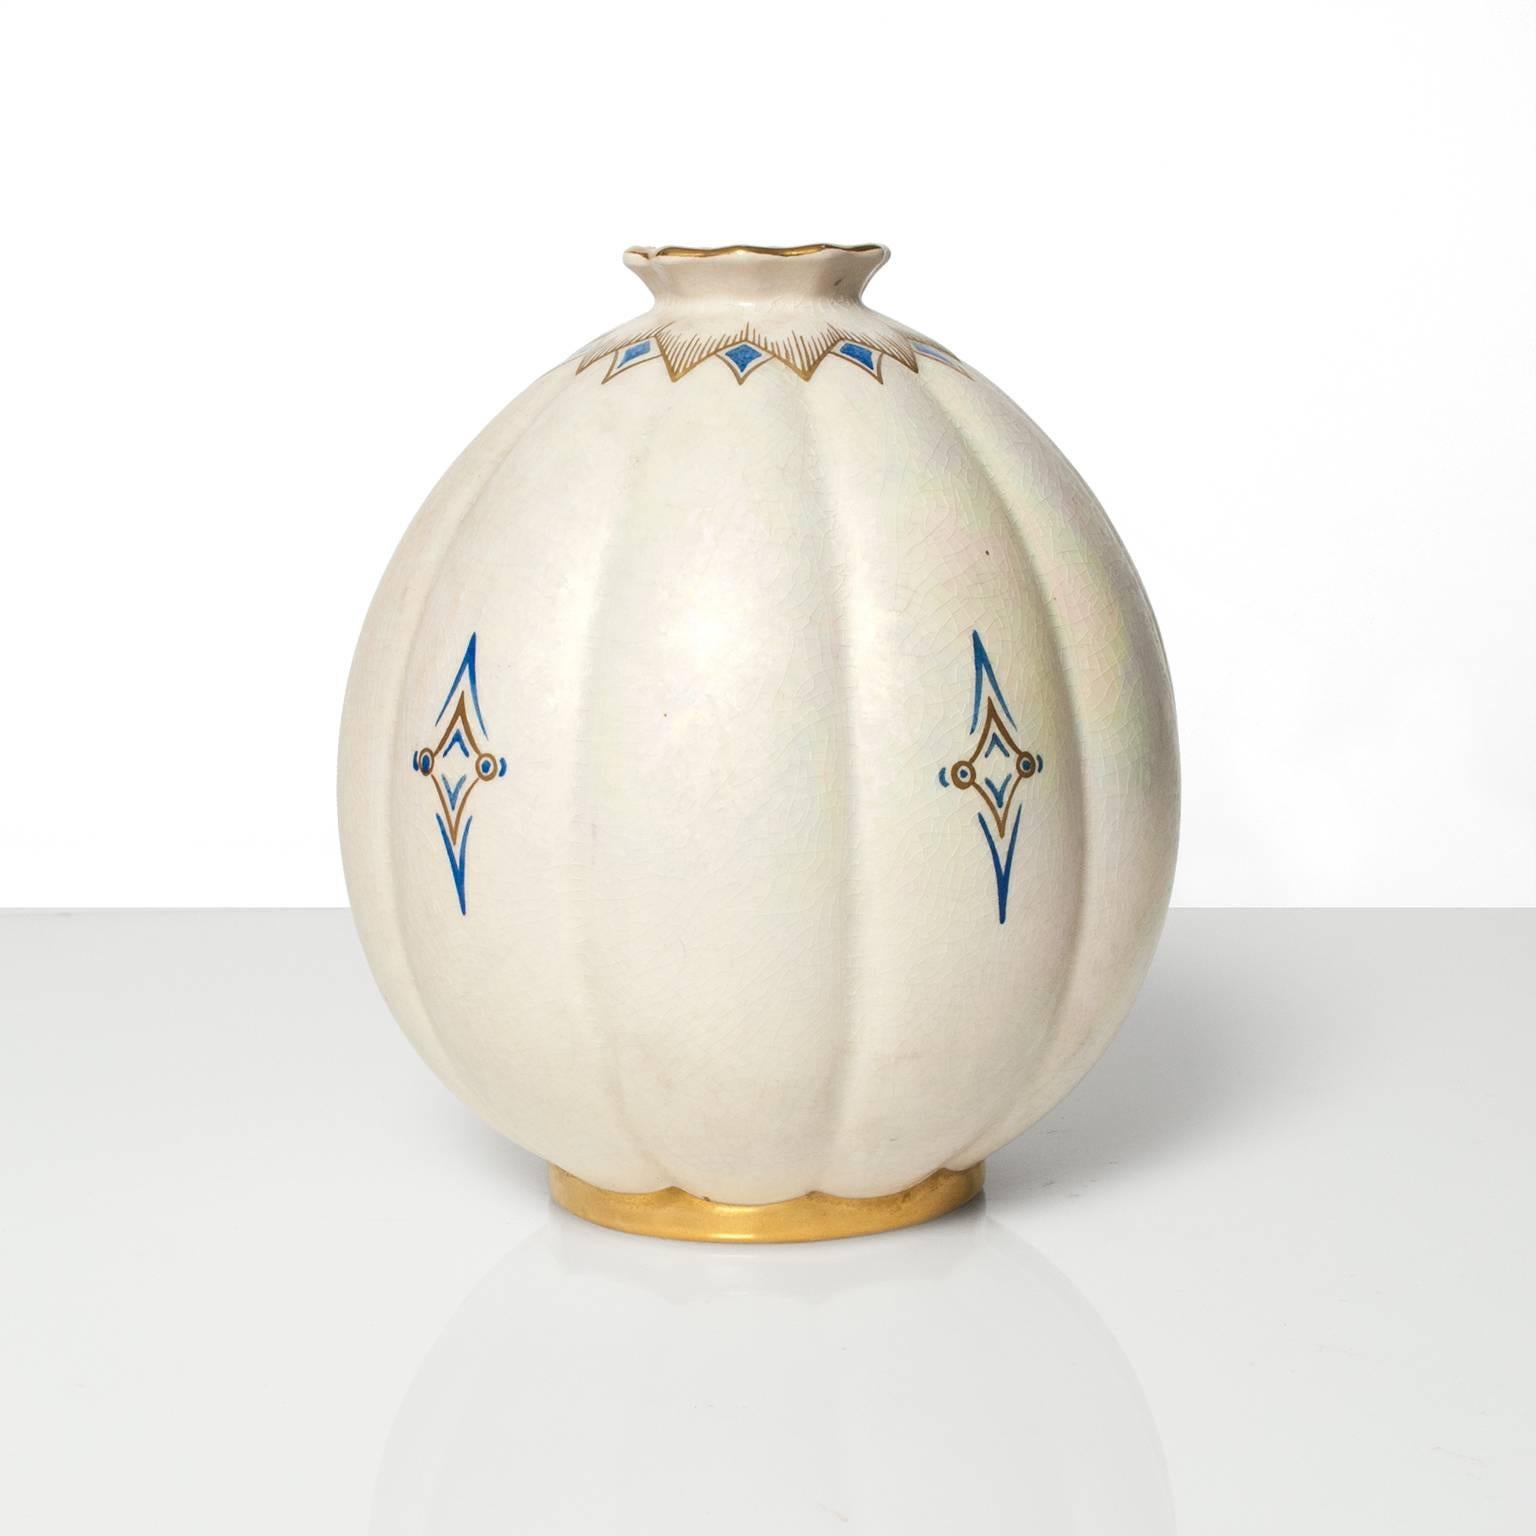 Scandinavian Modern, Swedish Art Deco hand decorated ceramic vase in white pearl uster glaze with details in gold and blue, from Gustavsberg. Designed and signed by Josef Ekberg, 1936. Height: 9", Diameter: 7.75".